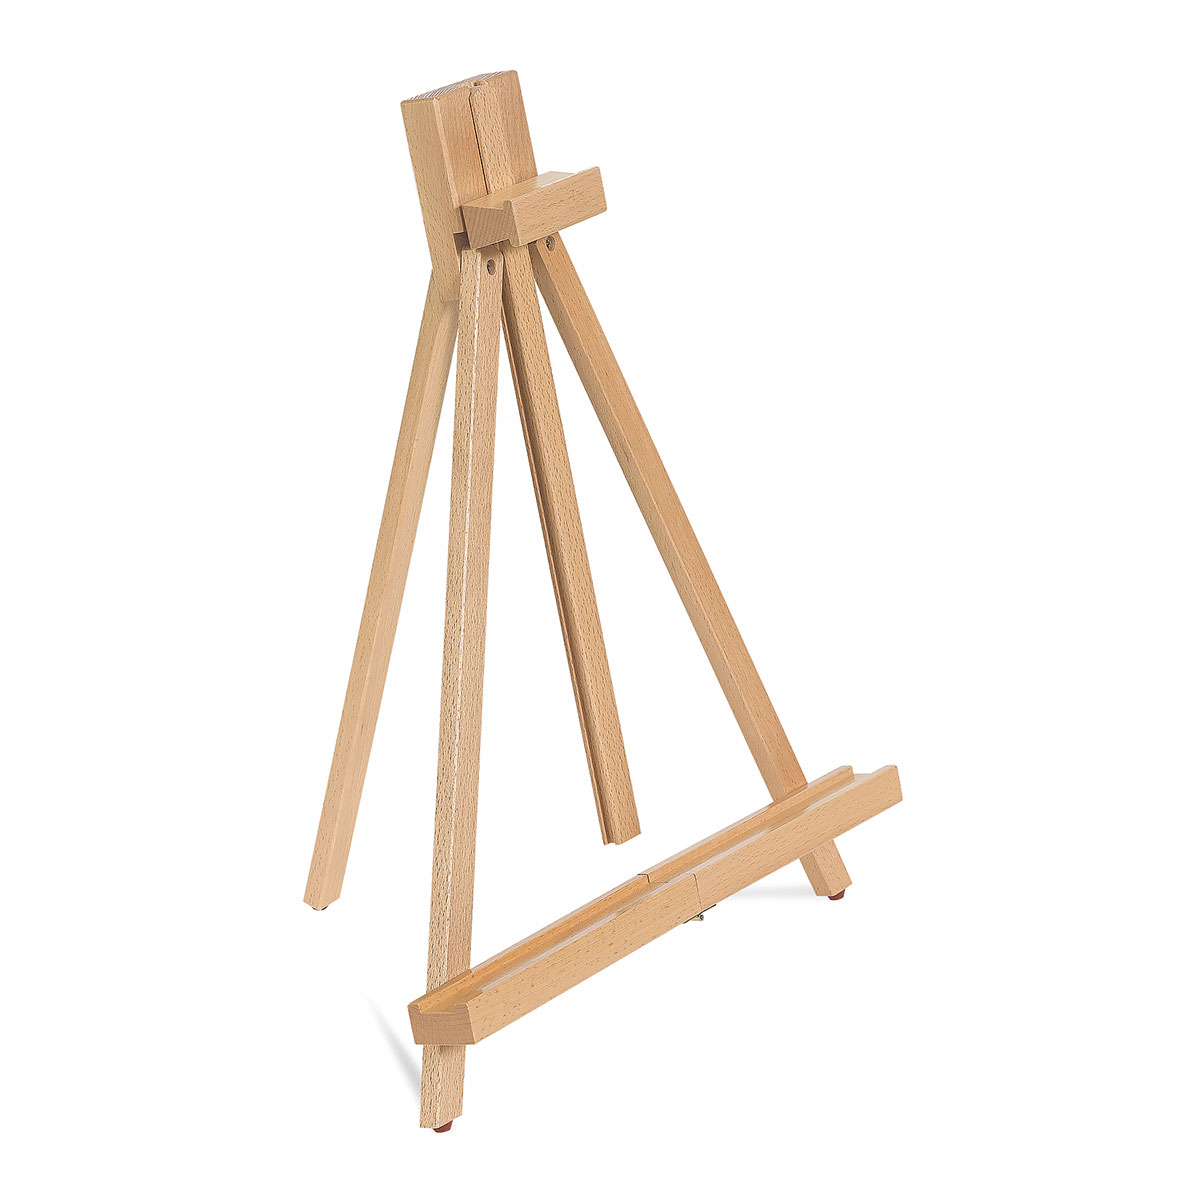 Beech-Wood Easel for Children & Adults incl Brushes Painting Borad Pallet Artina Le Mans Table Top Easel Acrylic Set 